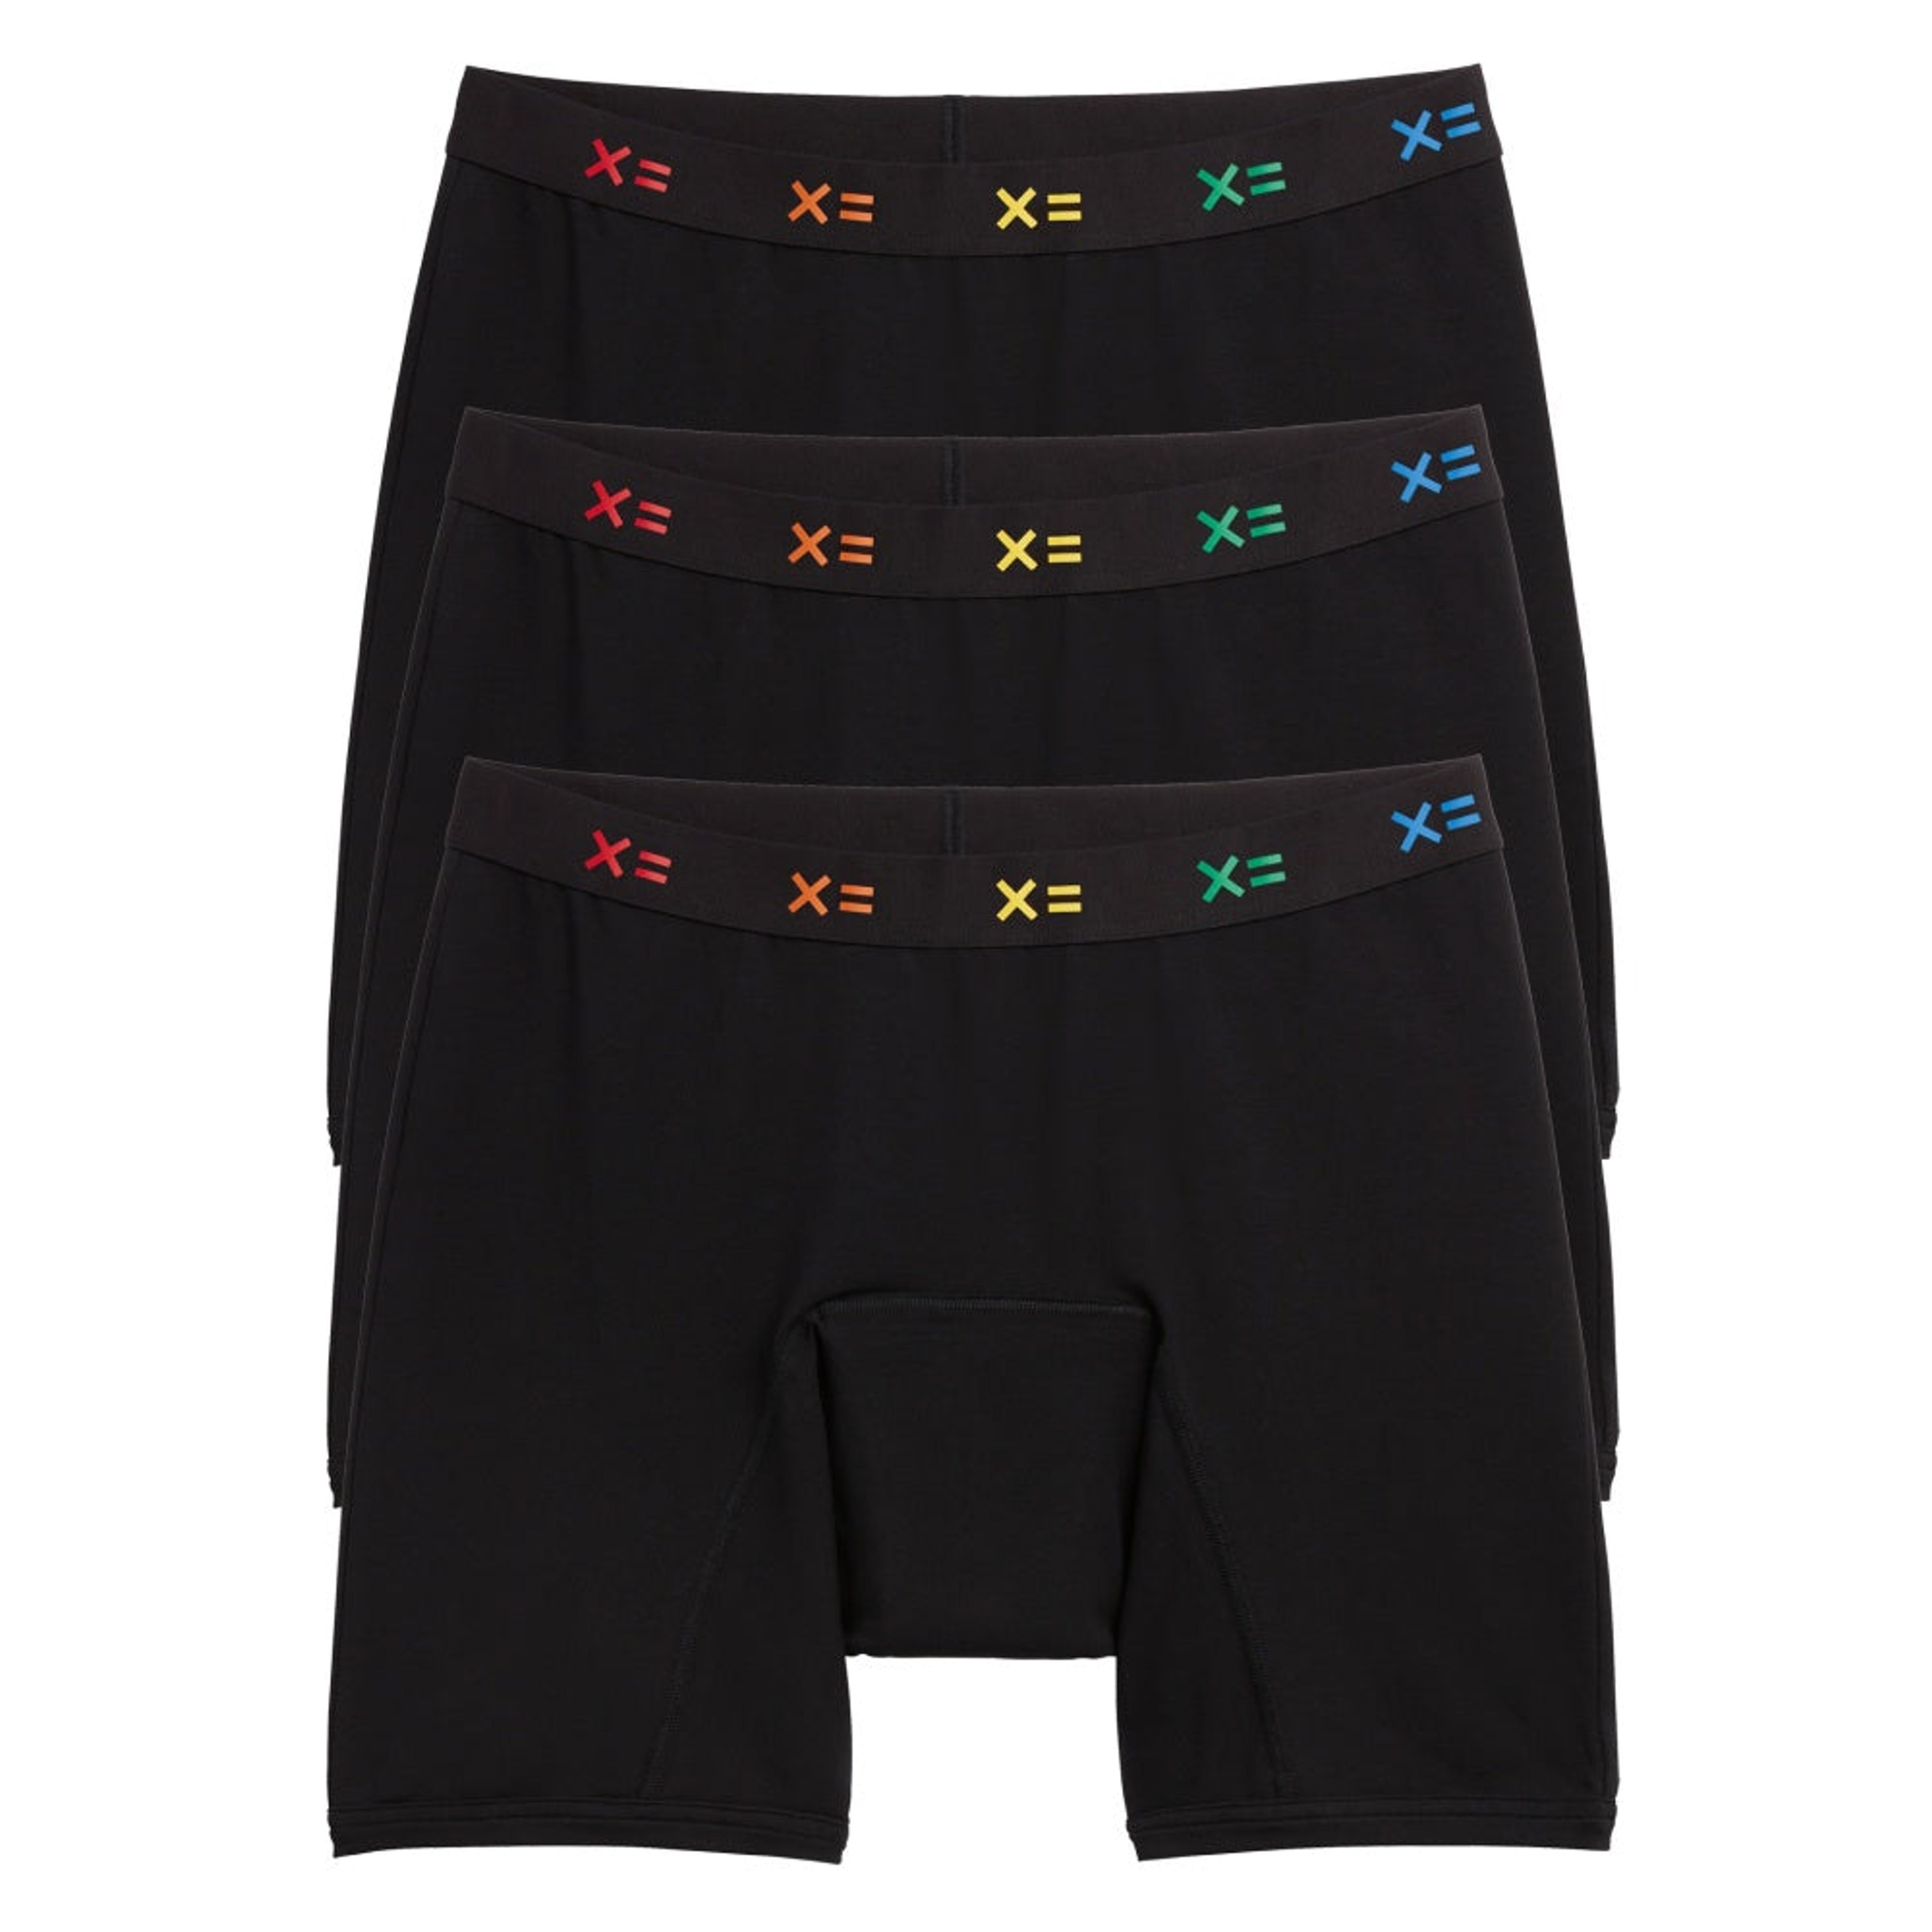 TomboyX First Line Period 9 Boxer Briefs 3-Pack - Black X